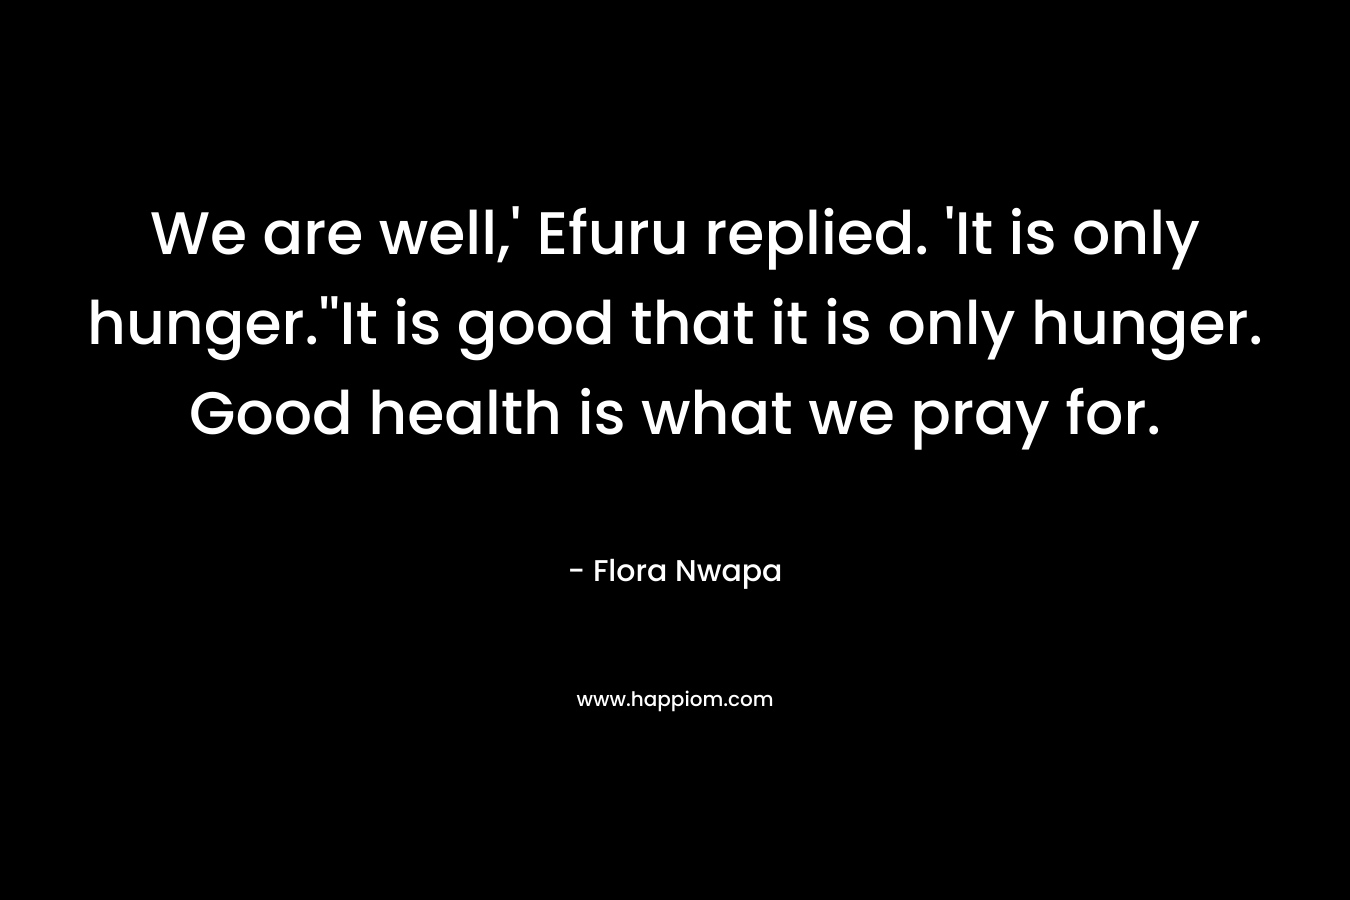 We are well,' Efuru replied. 'It is only hunger.''It is good that it is only hunger. Good health is what we pray for.